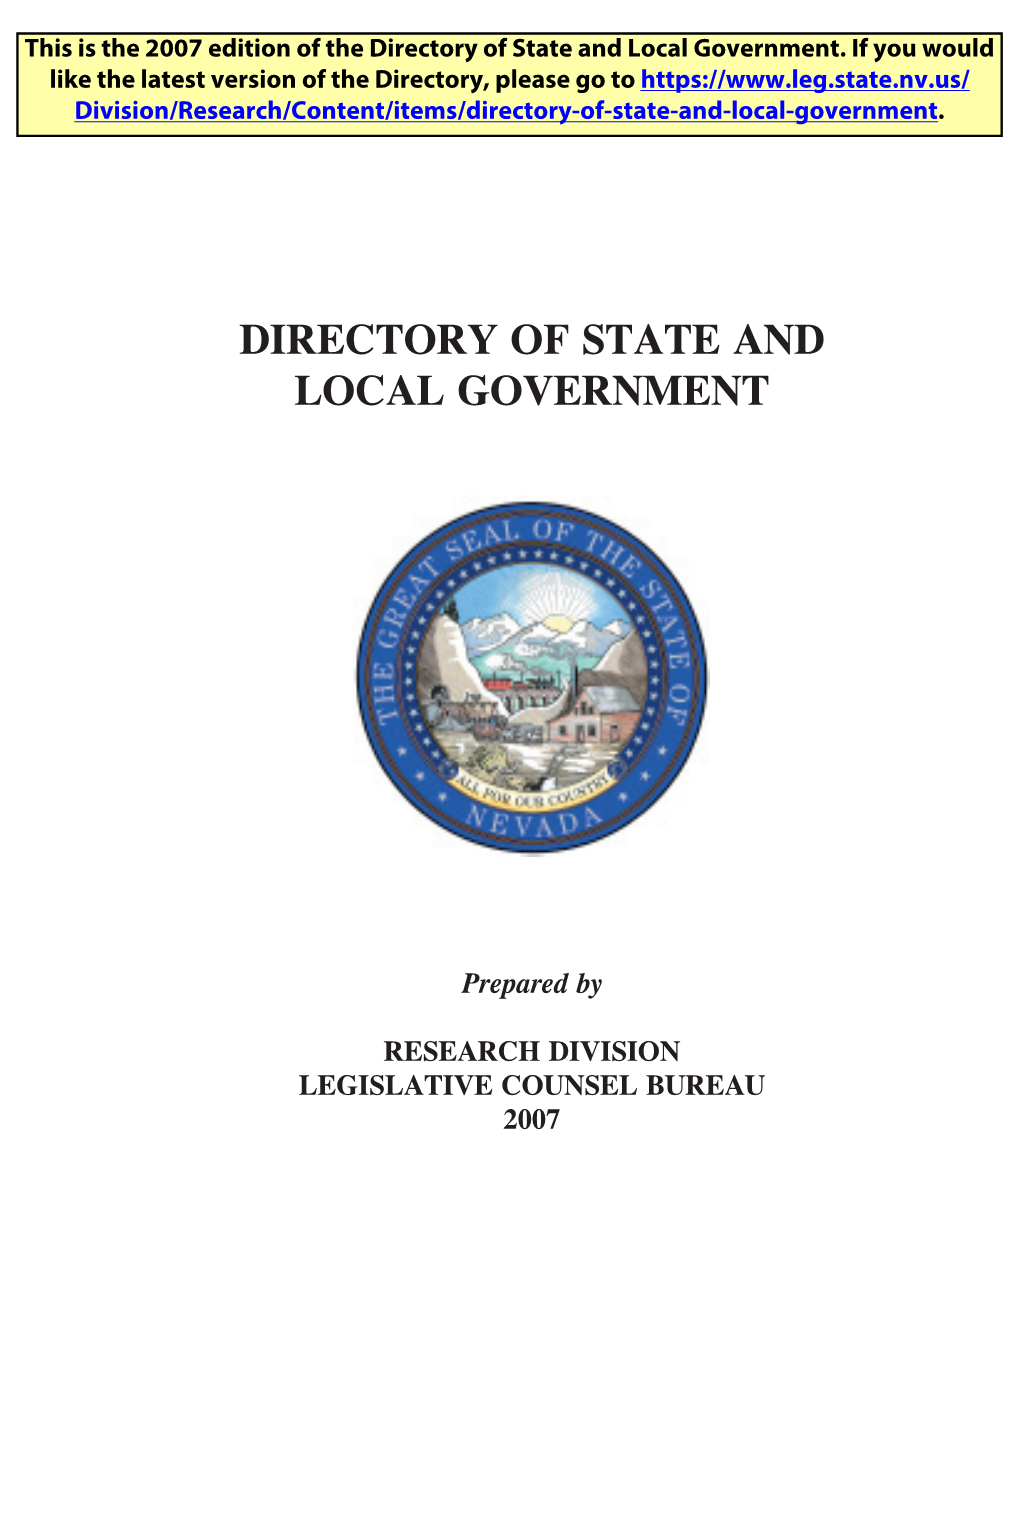 2007 Directory of State and Local Government